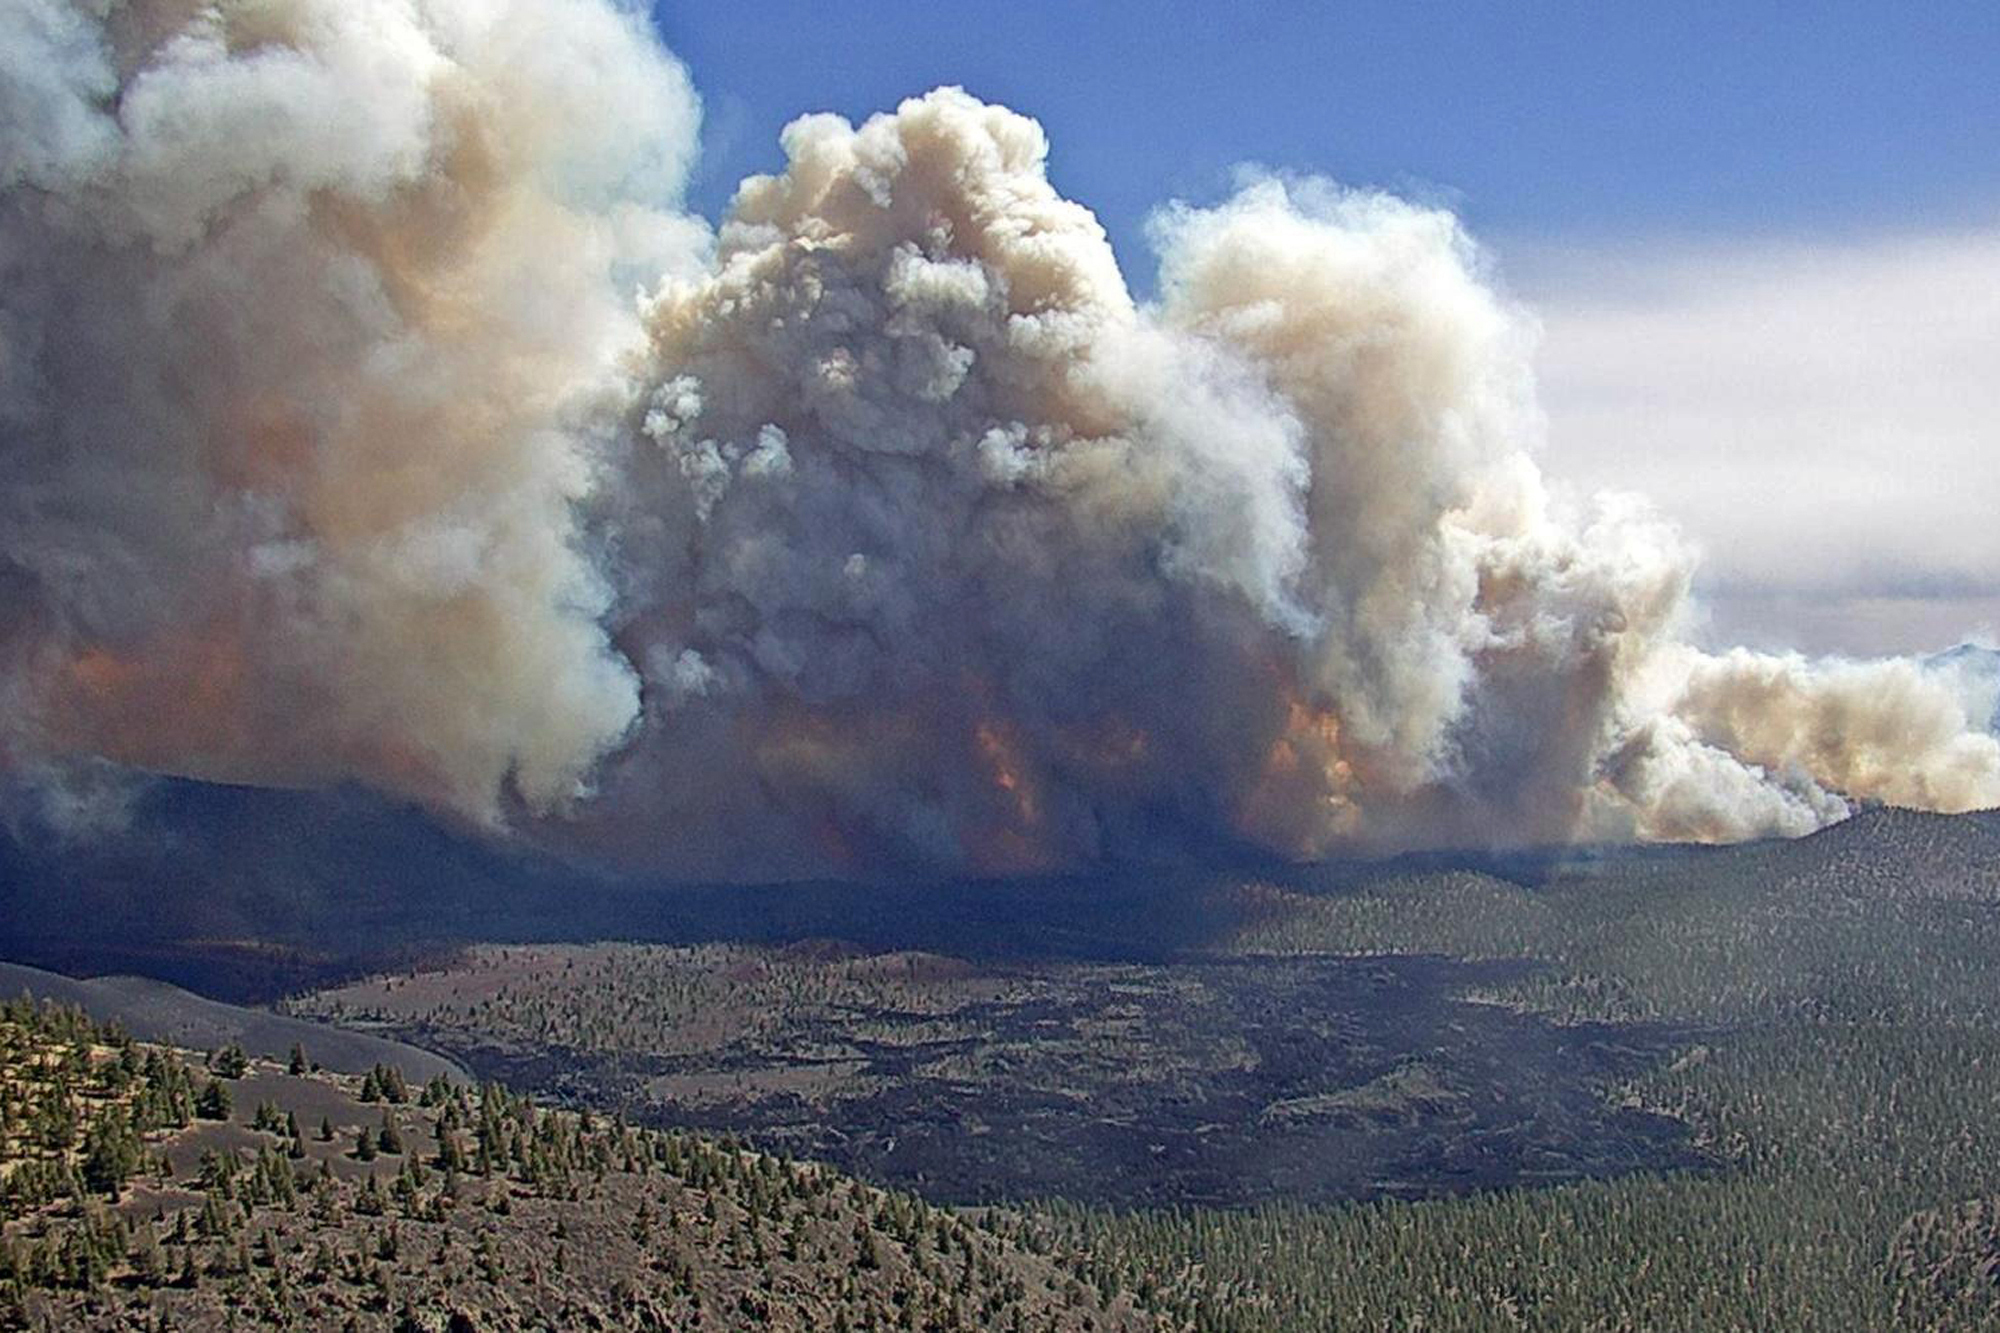 PHOTO: In this photo provided by the Coconino National Forest, the Tunnel Fire burns near Flagstaff, Ariz., April 19, 2022.